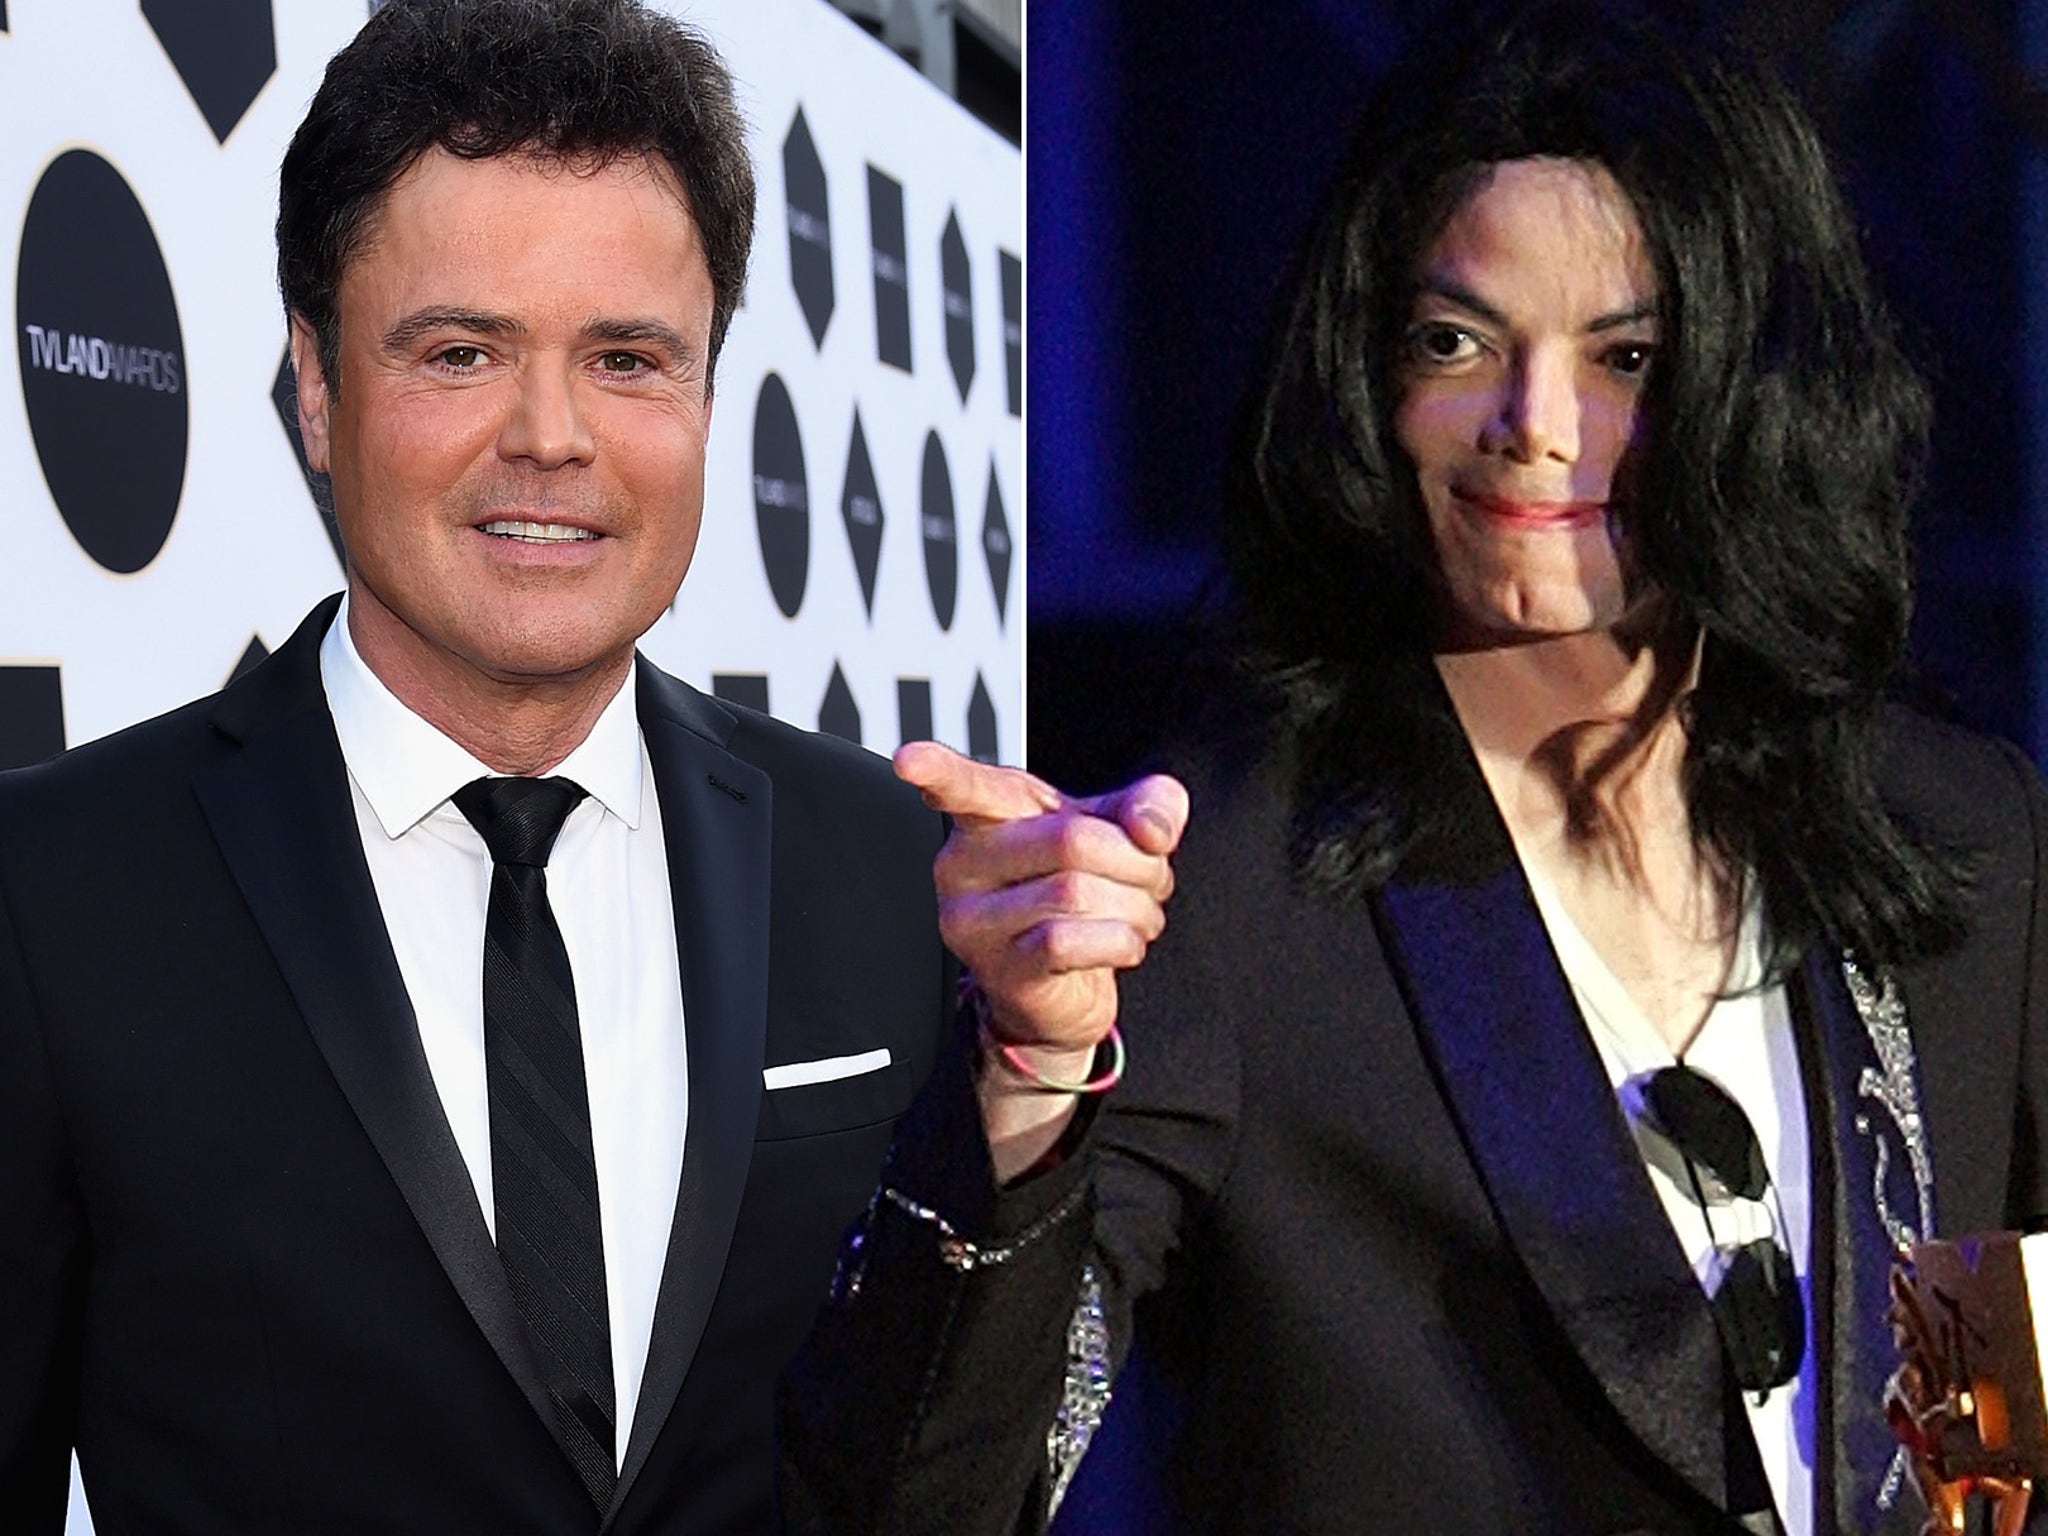 Donny Osmond Opens Up About Final Conversation with Michael Jackson,  Growing Up and Career Advice